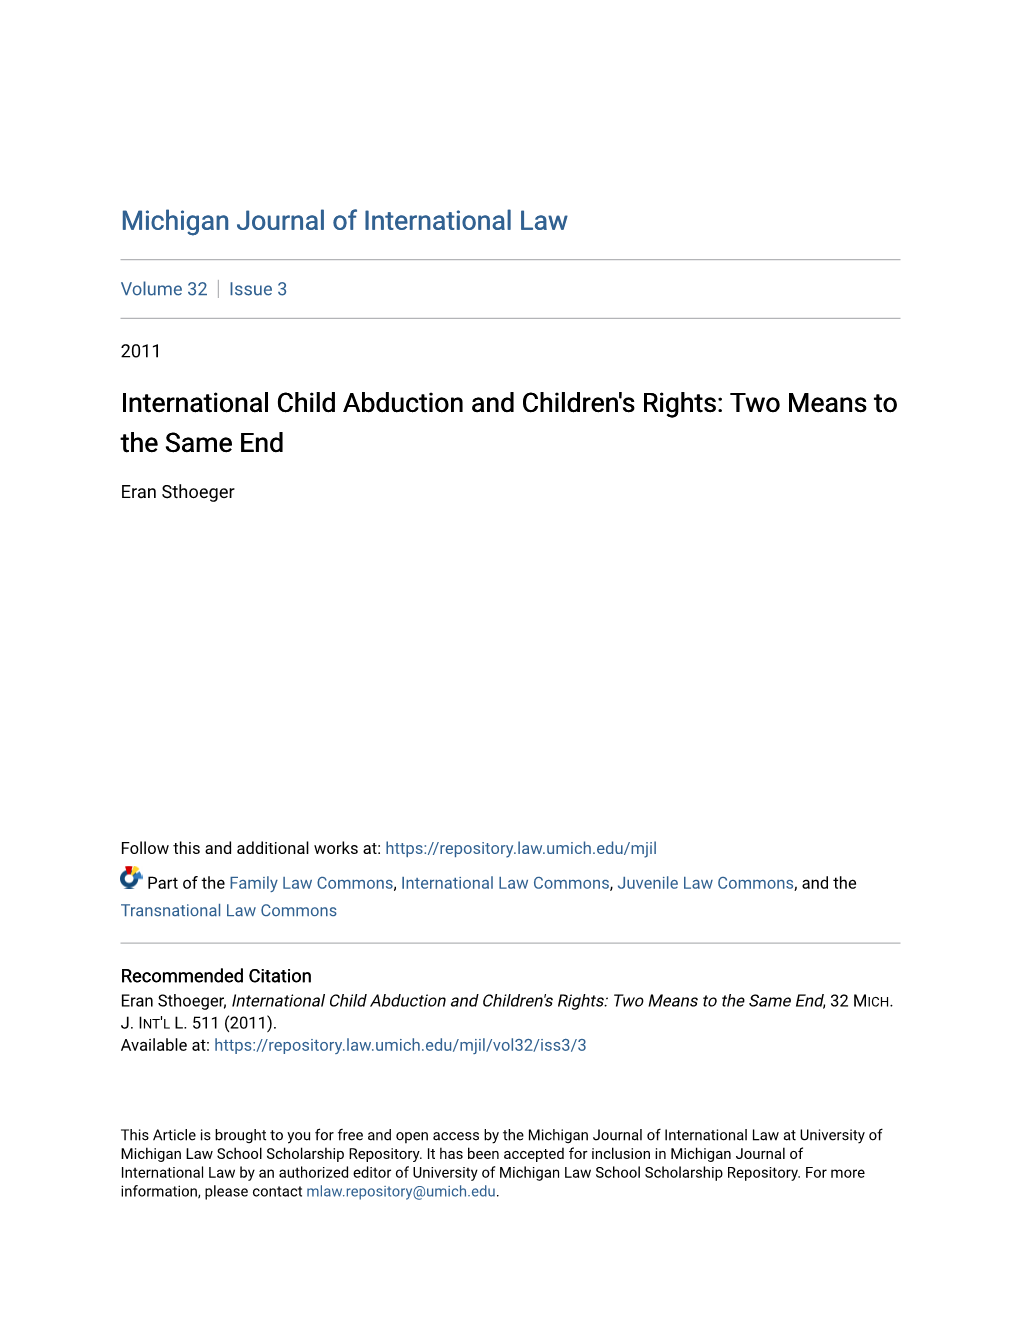 International Child Abduction and Children's Rights: Two Means to the Same End